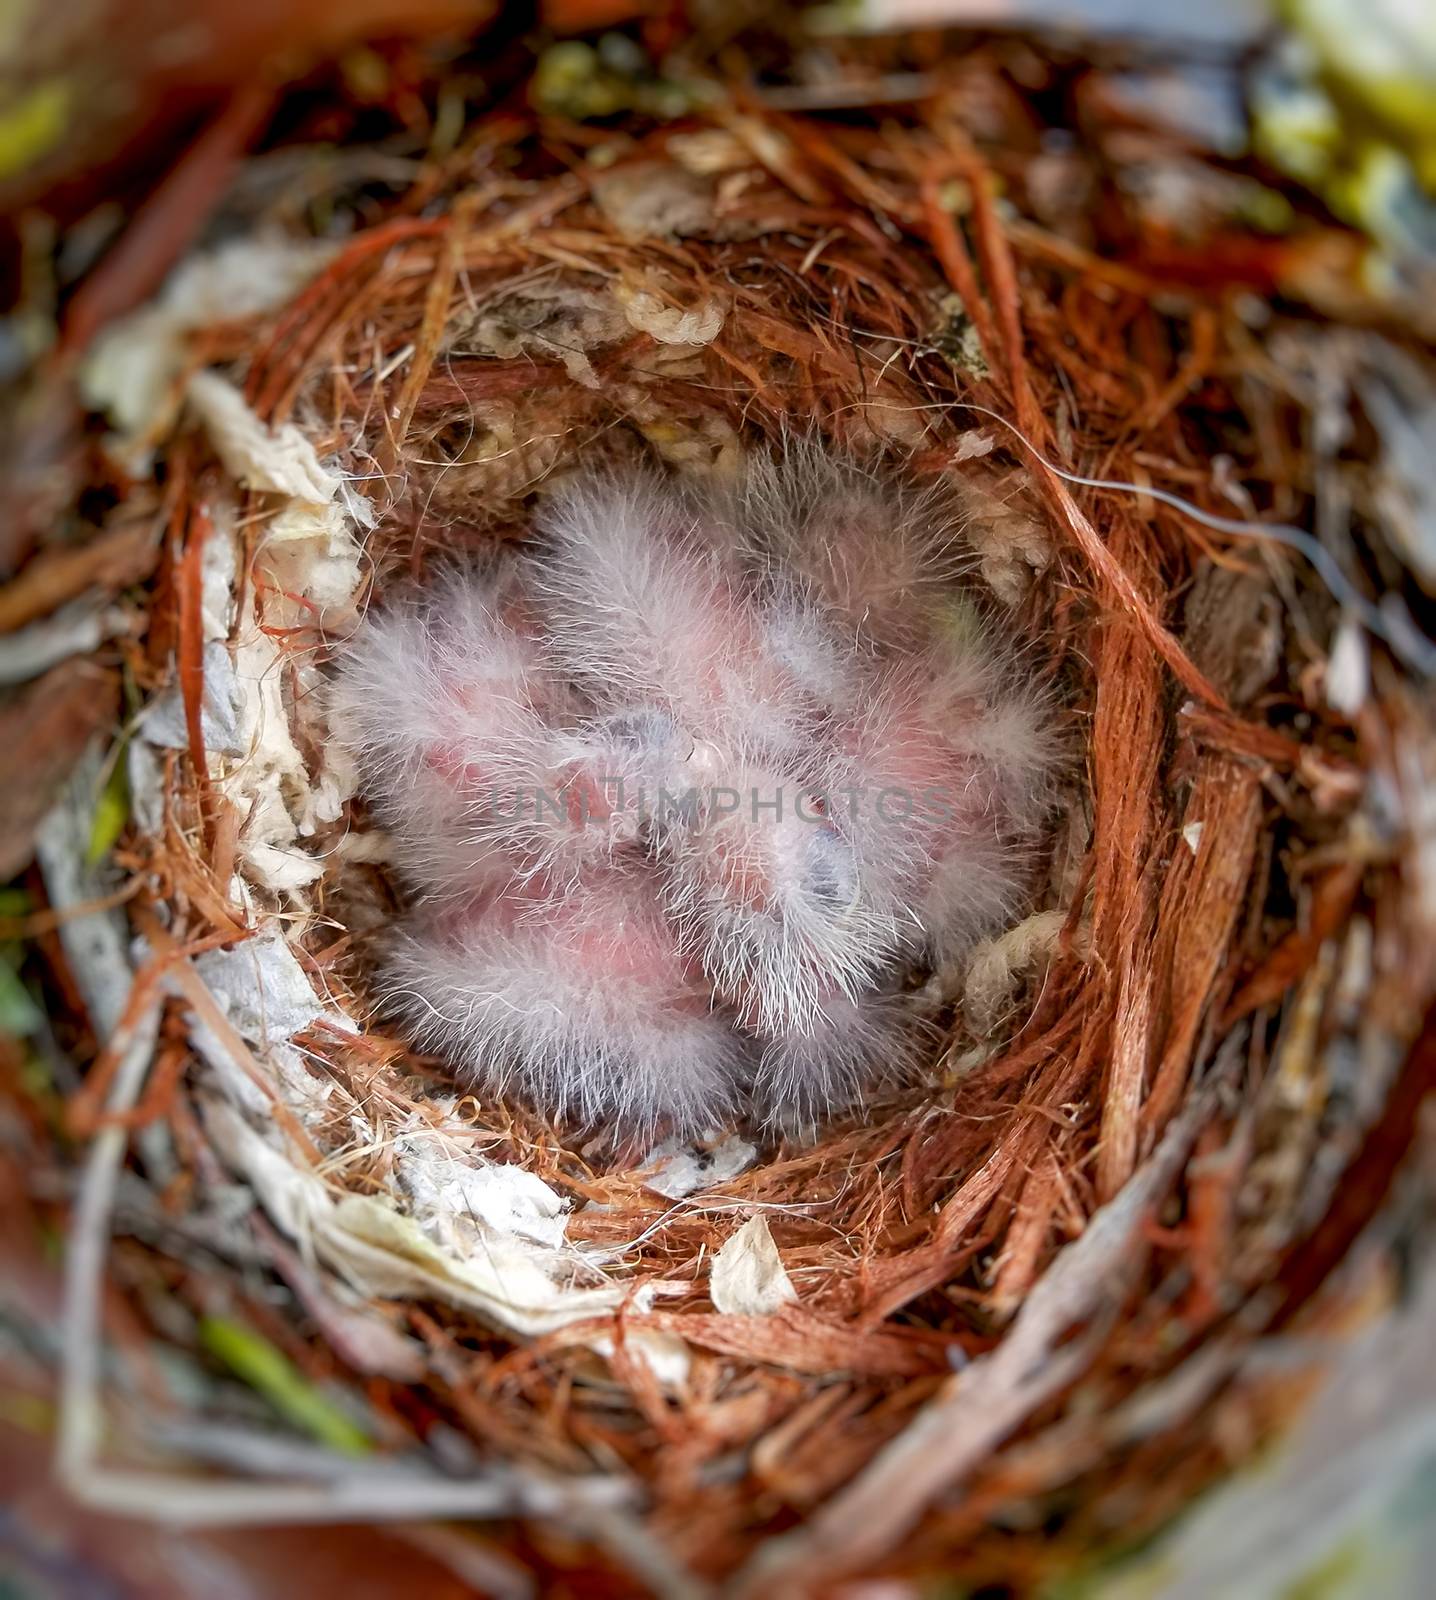 House Finch Babies by whitechild